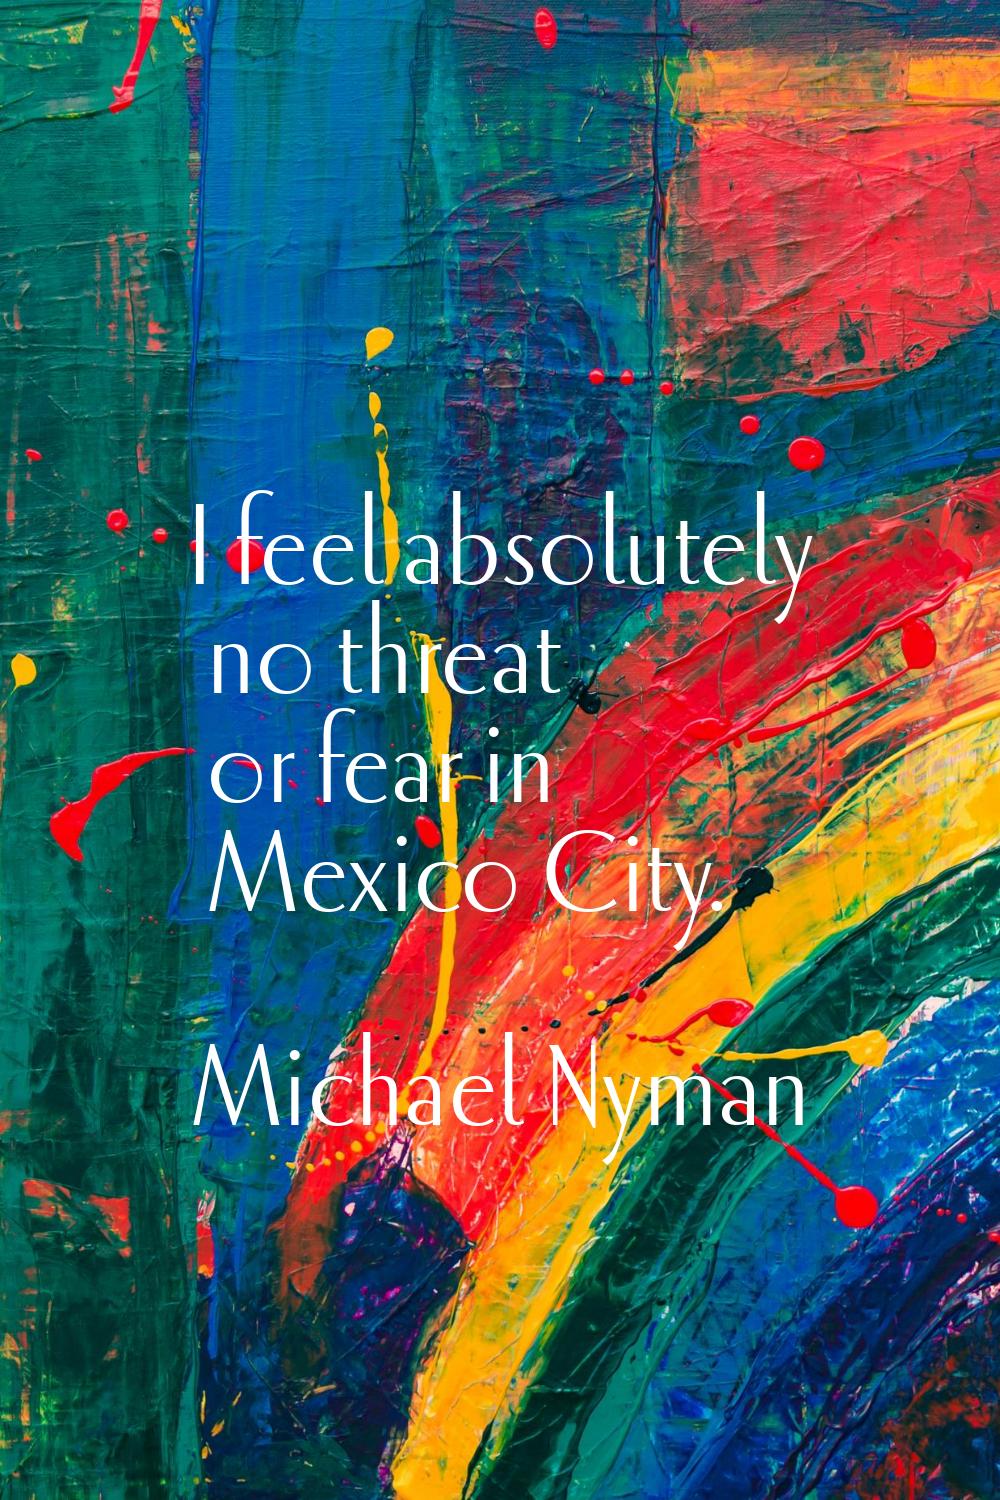 I feel absolutely no threat or fear in Mexico City.